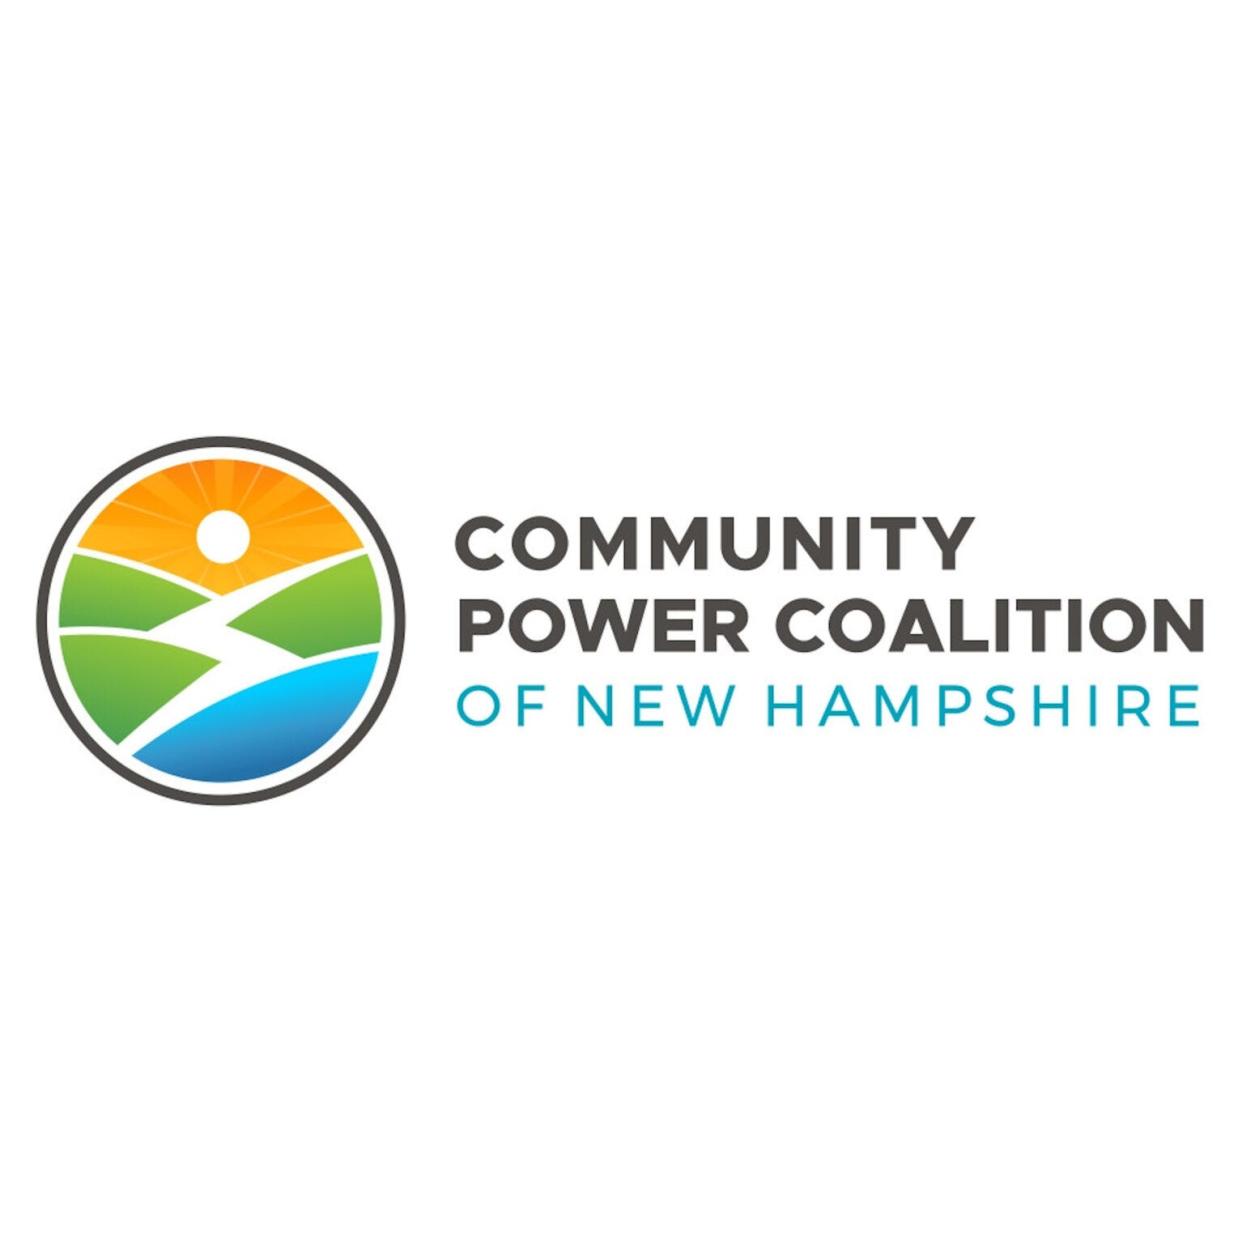 Thirty communities have voted to join the Community Power Coalition.